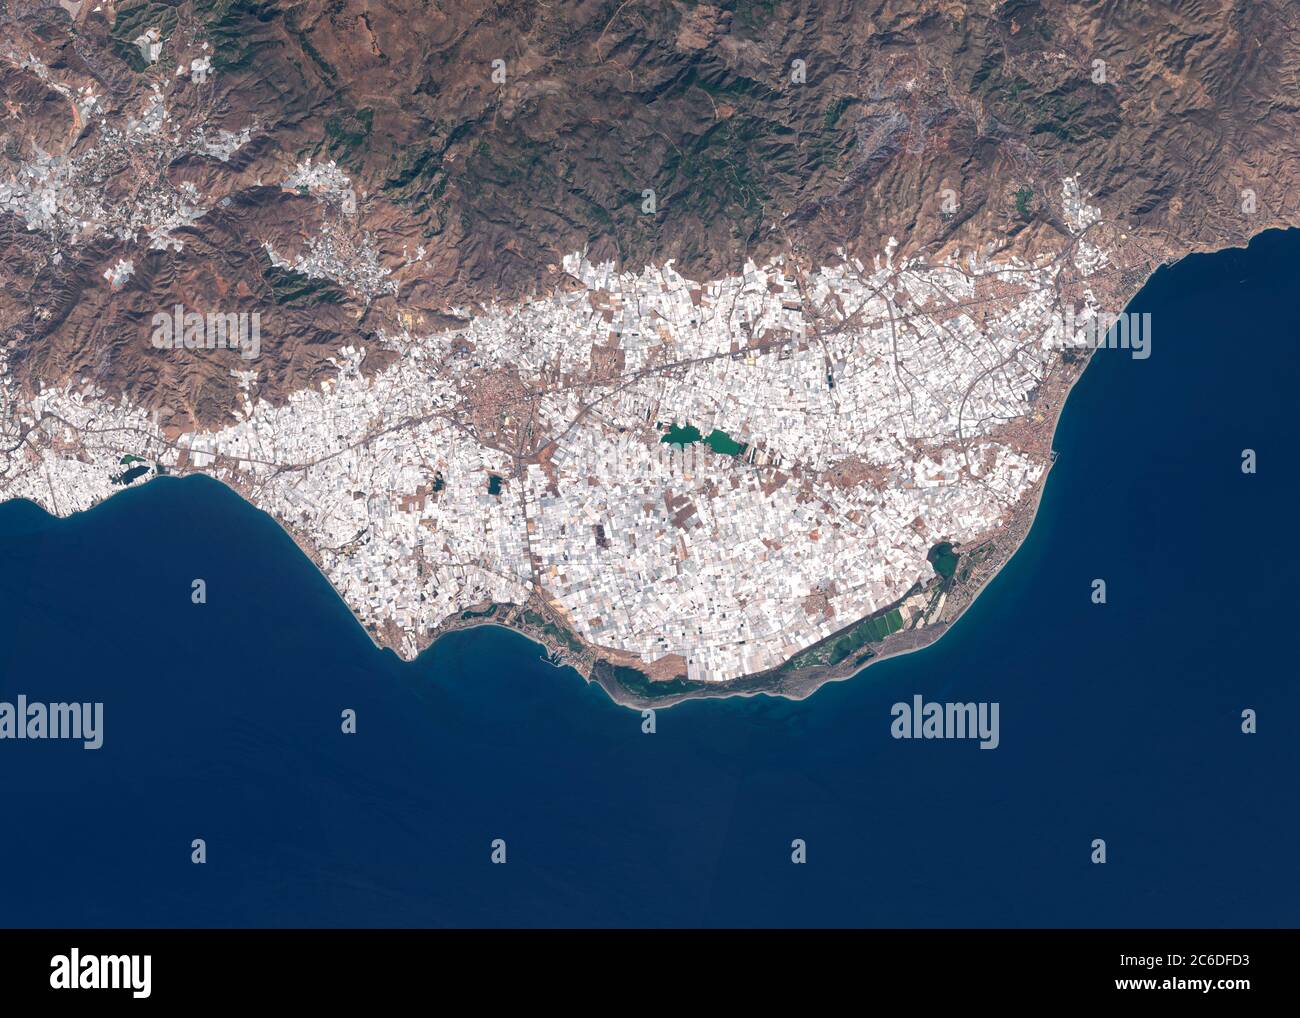 Satellite image of intensive farming with plastic greenhouses in Spain Stock Photo